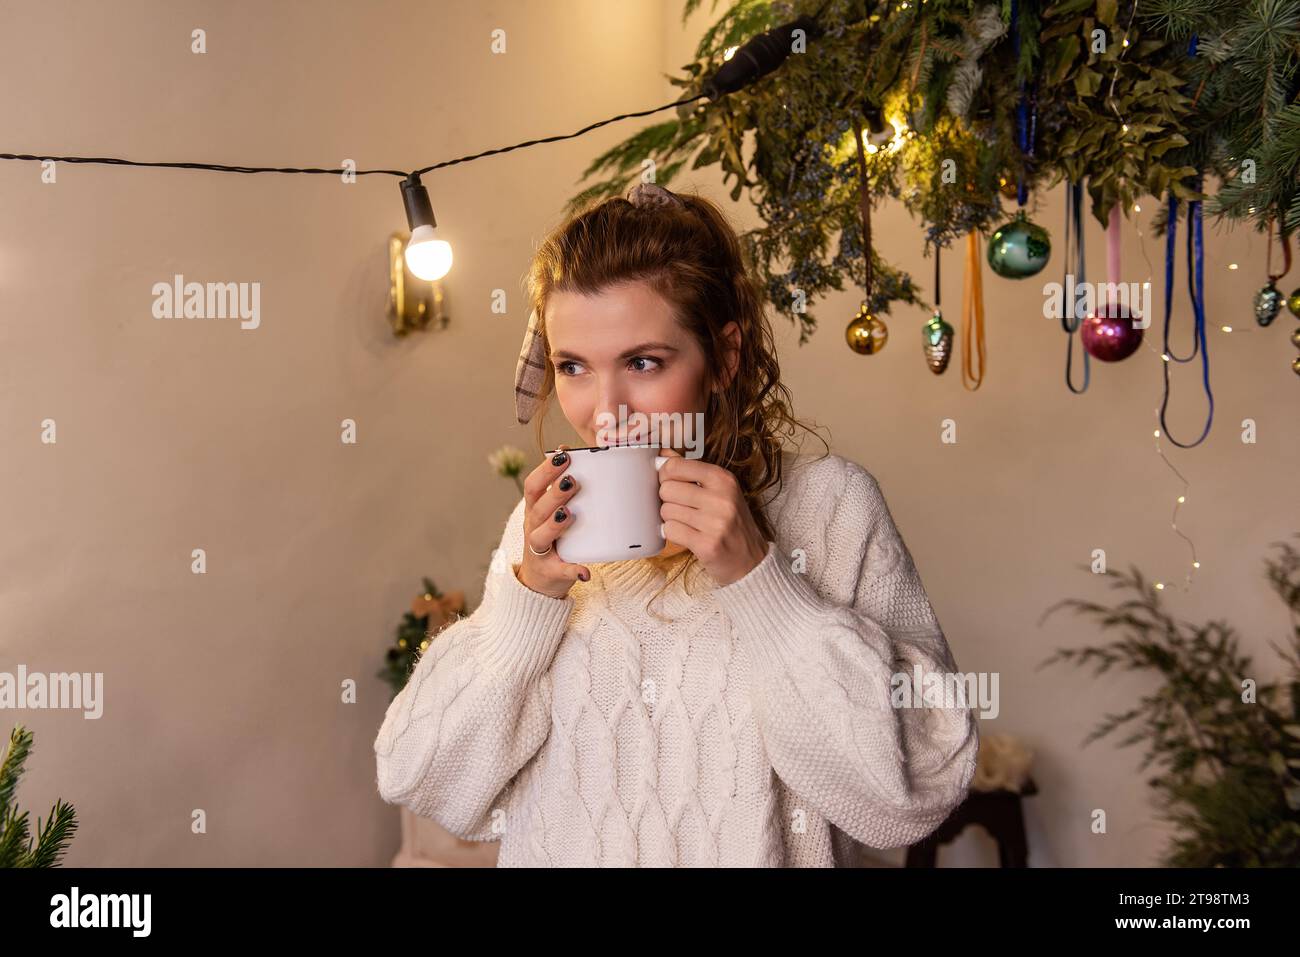 Close-up portrait of young woman holding white cup with hot drink. Girl drinks tea in Christmas interior in morning. Creative home decoration, hanging Stock Photo